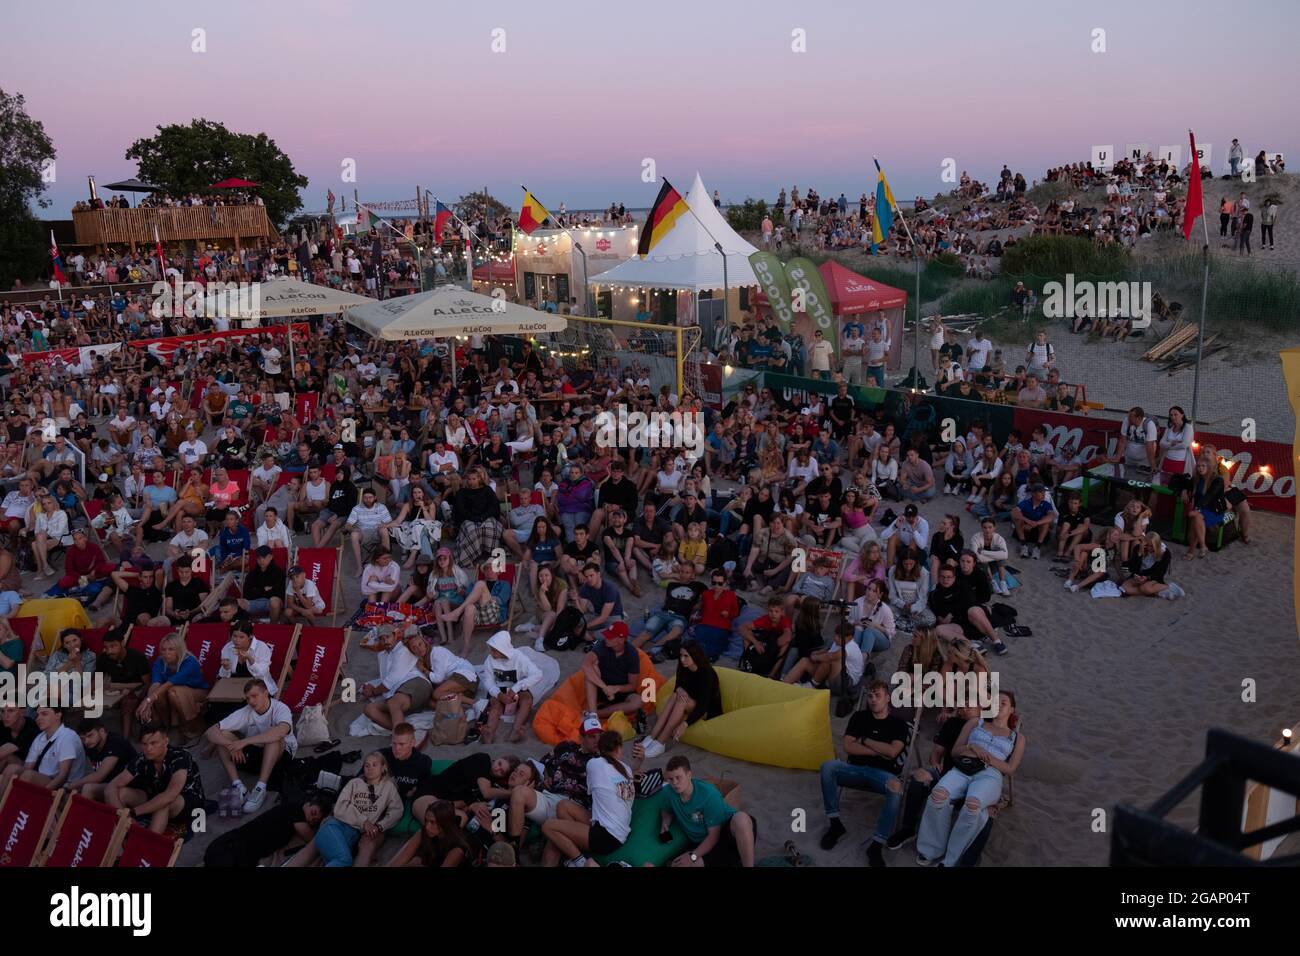 Pärnu, Estonia - July 11, 2021: Large crowd of fans cathered together to  watch European Football Championship final between Italy and England on  Pärnu Stock Photo - Alamy